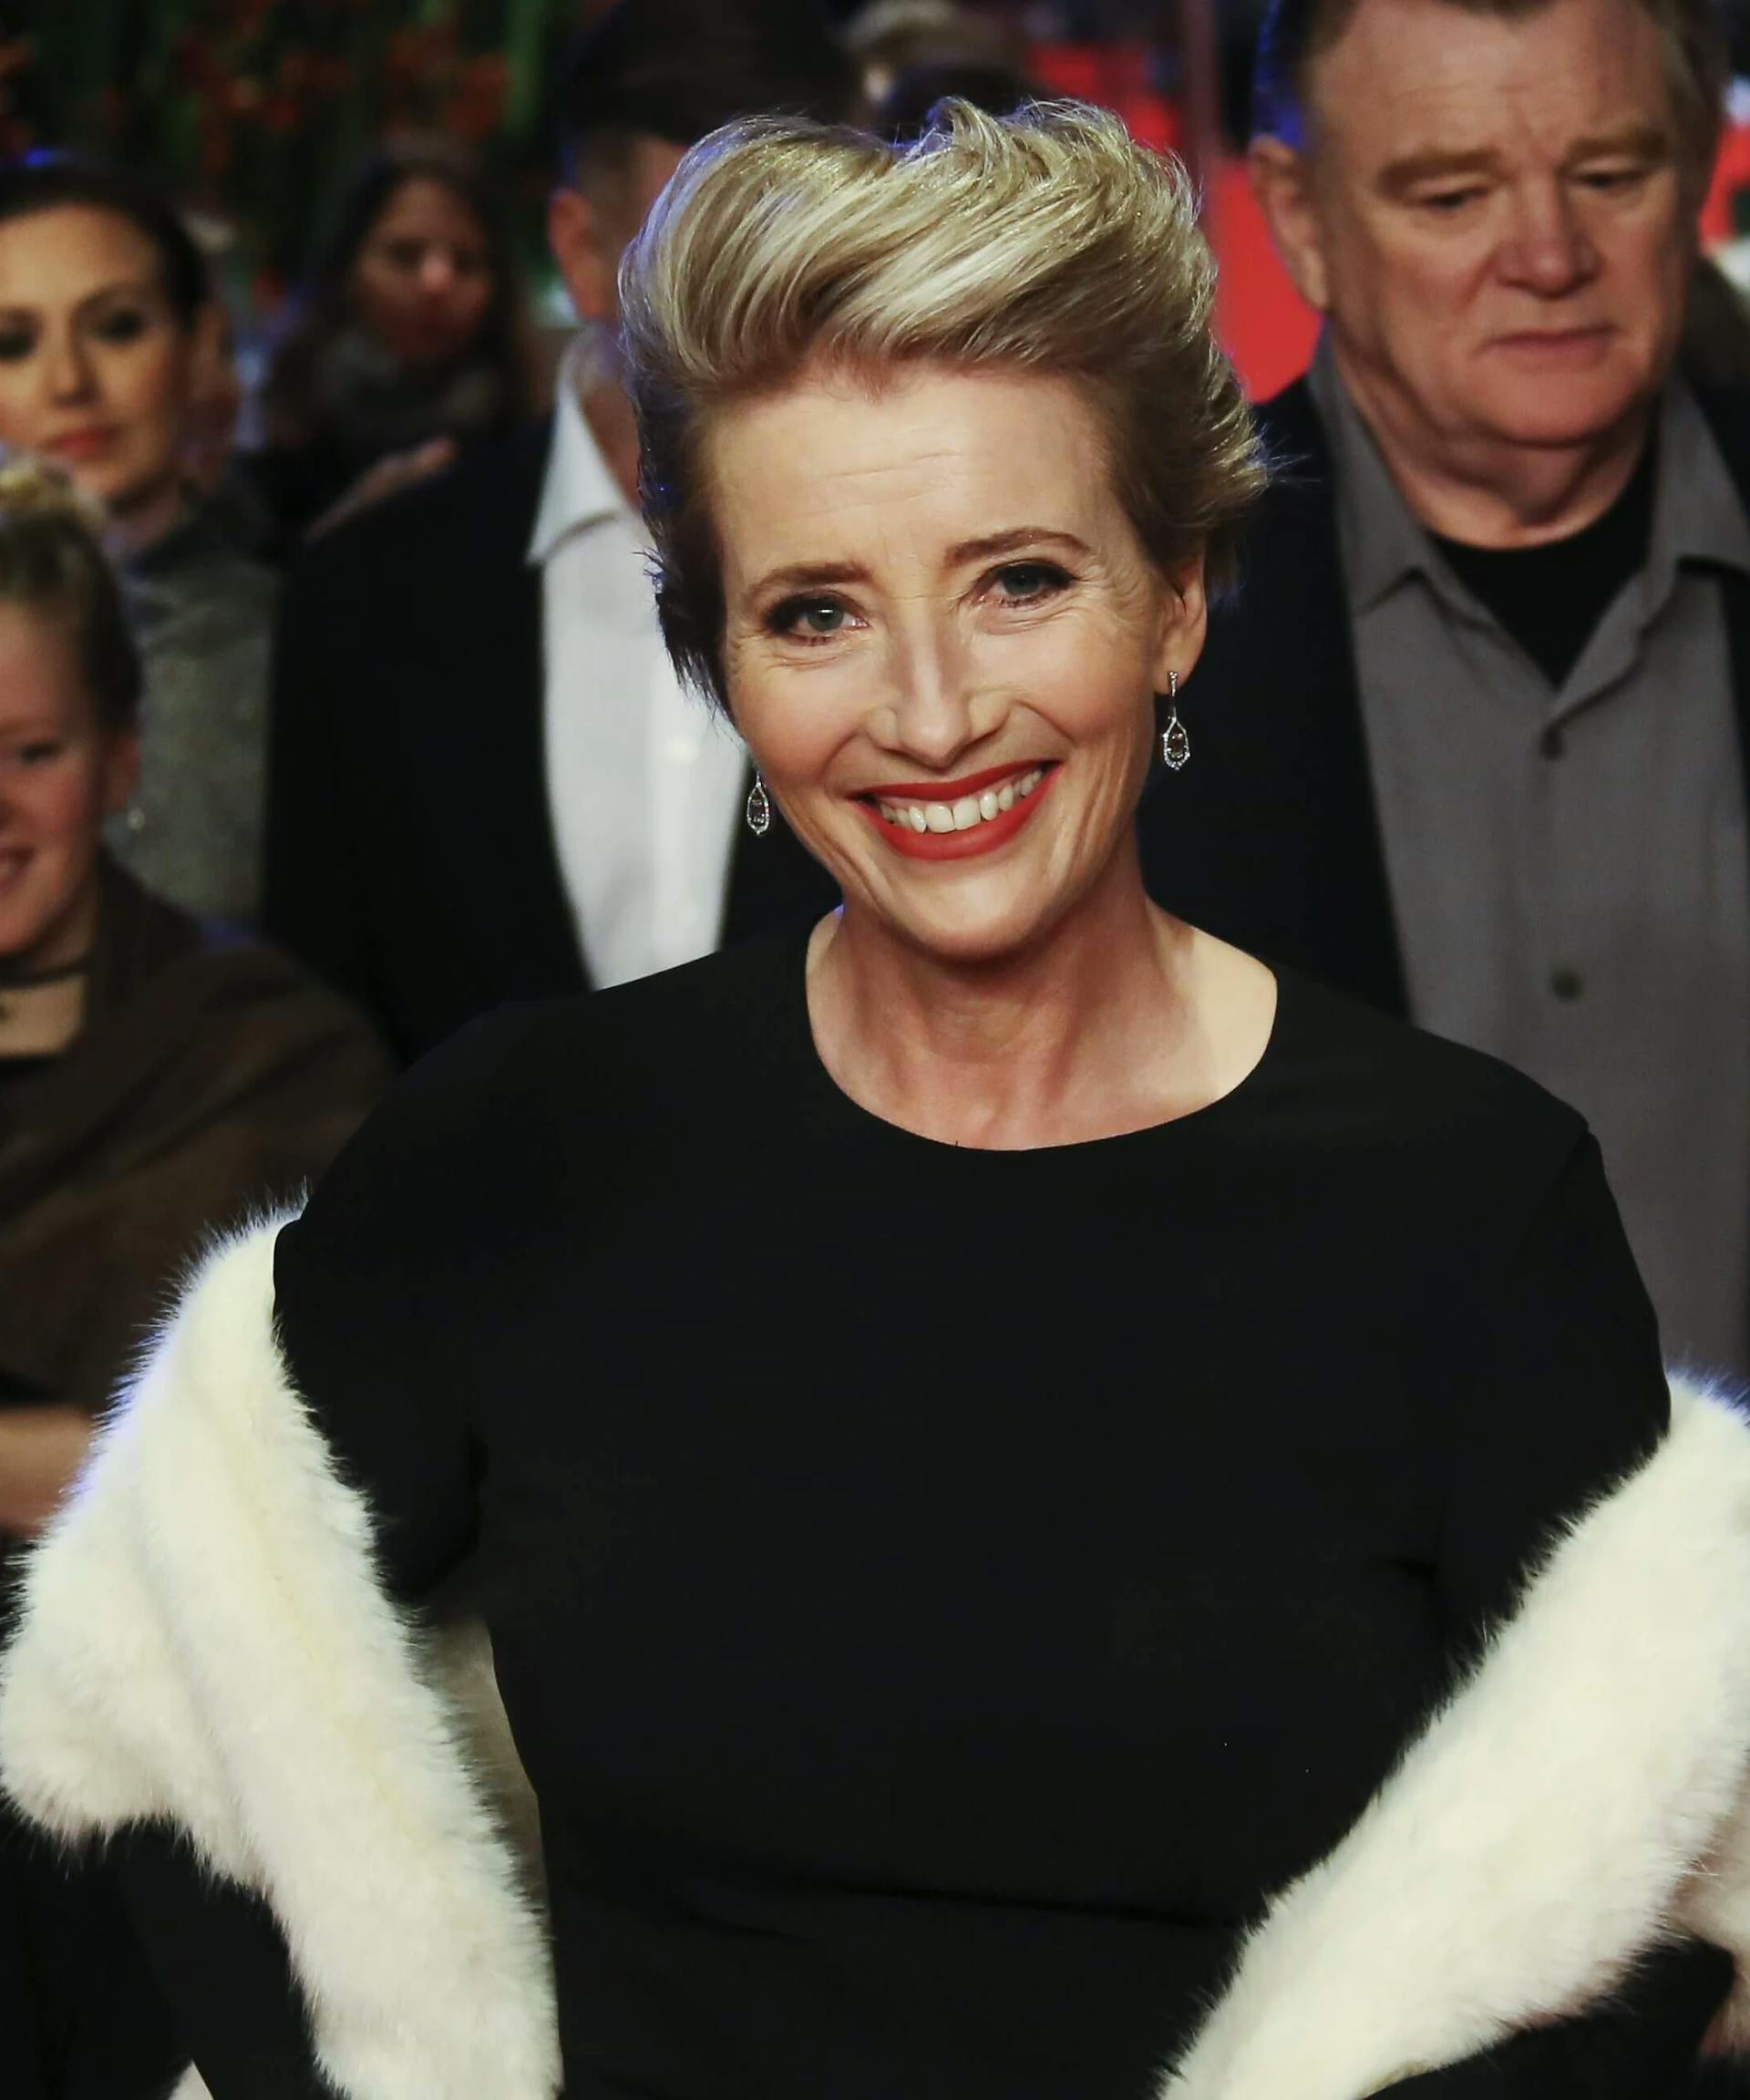 Emma Thompson Criticizes Hollywood For Failing To Portray Authentic Womanhood